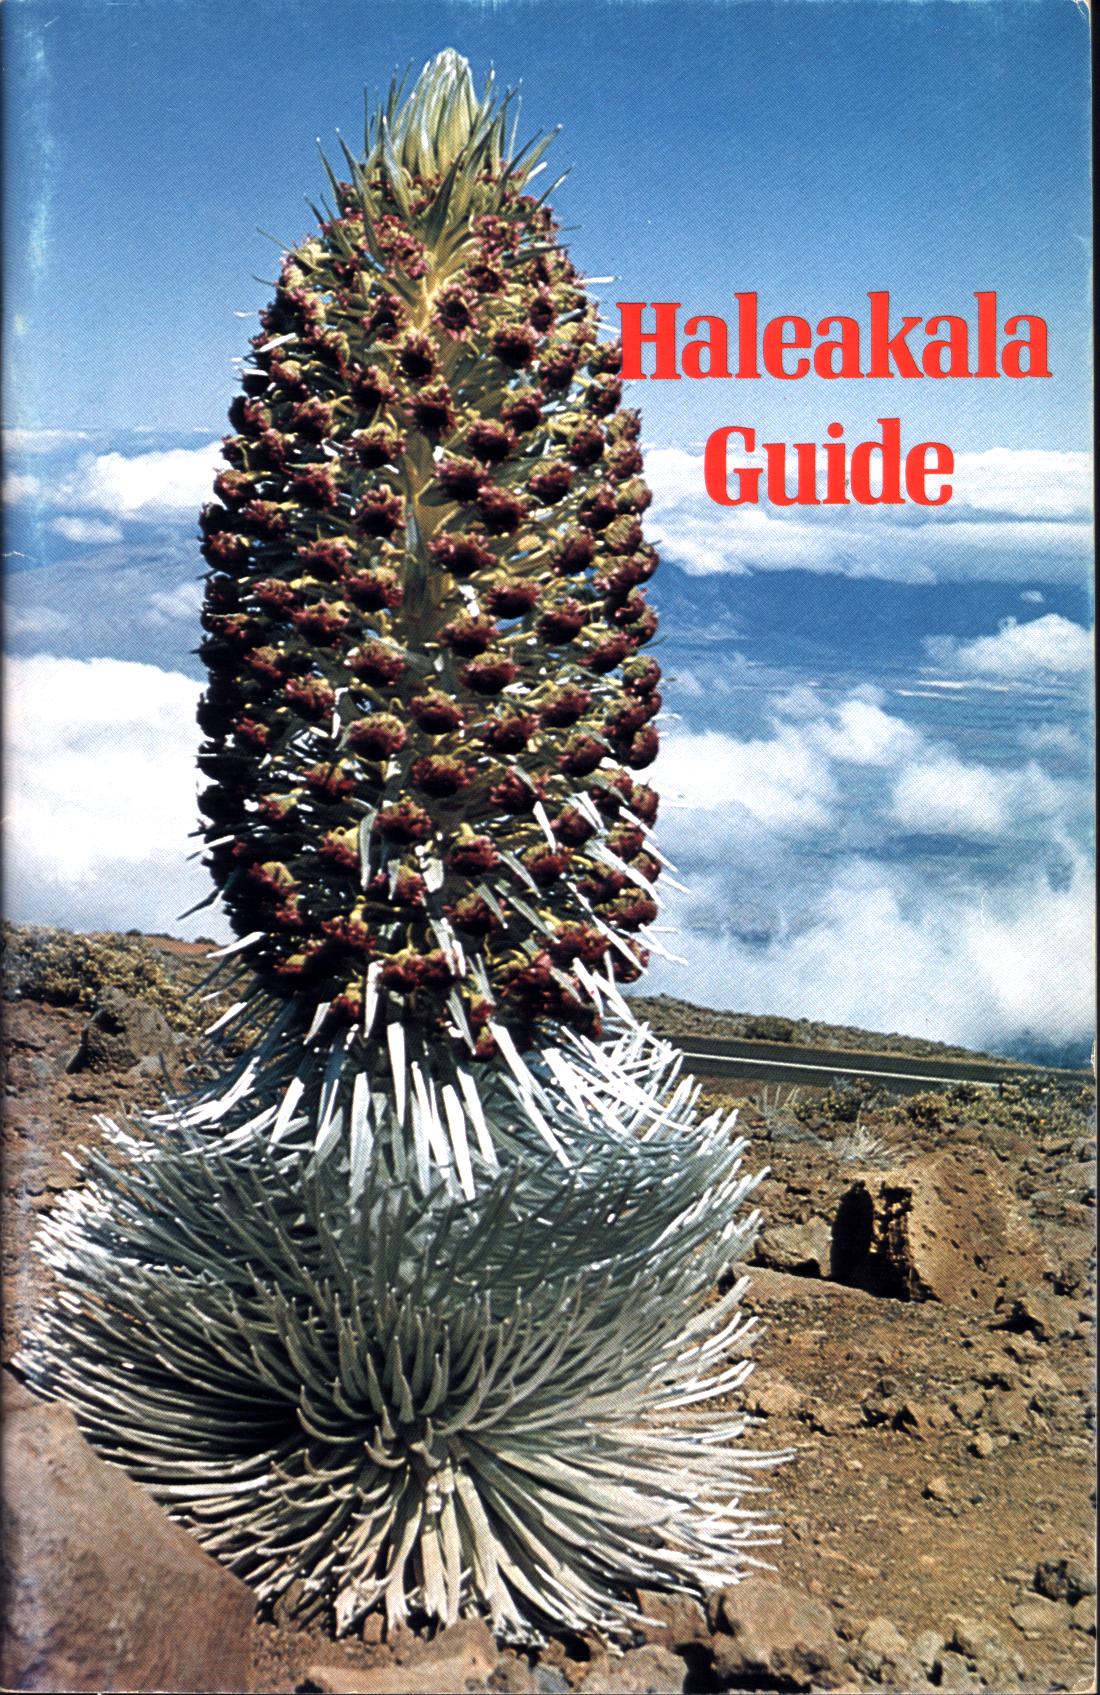 A GUIDE TO THE CRATER AREA OF HALEAKALA NATIONAL PARK.